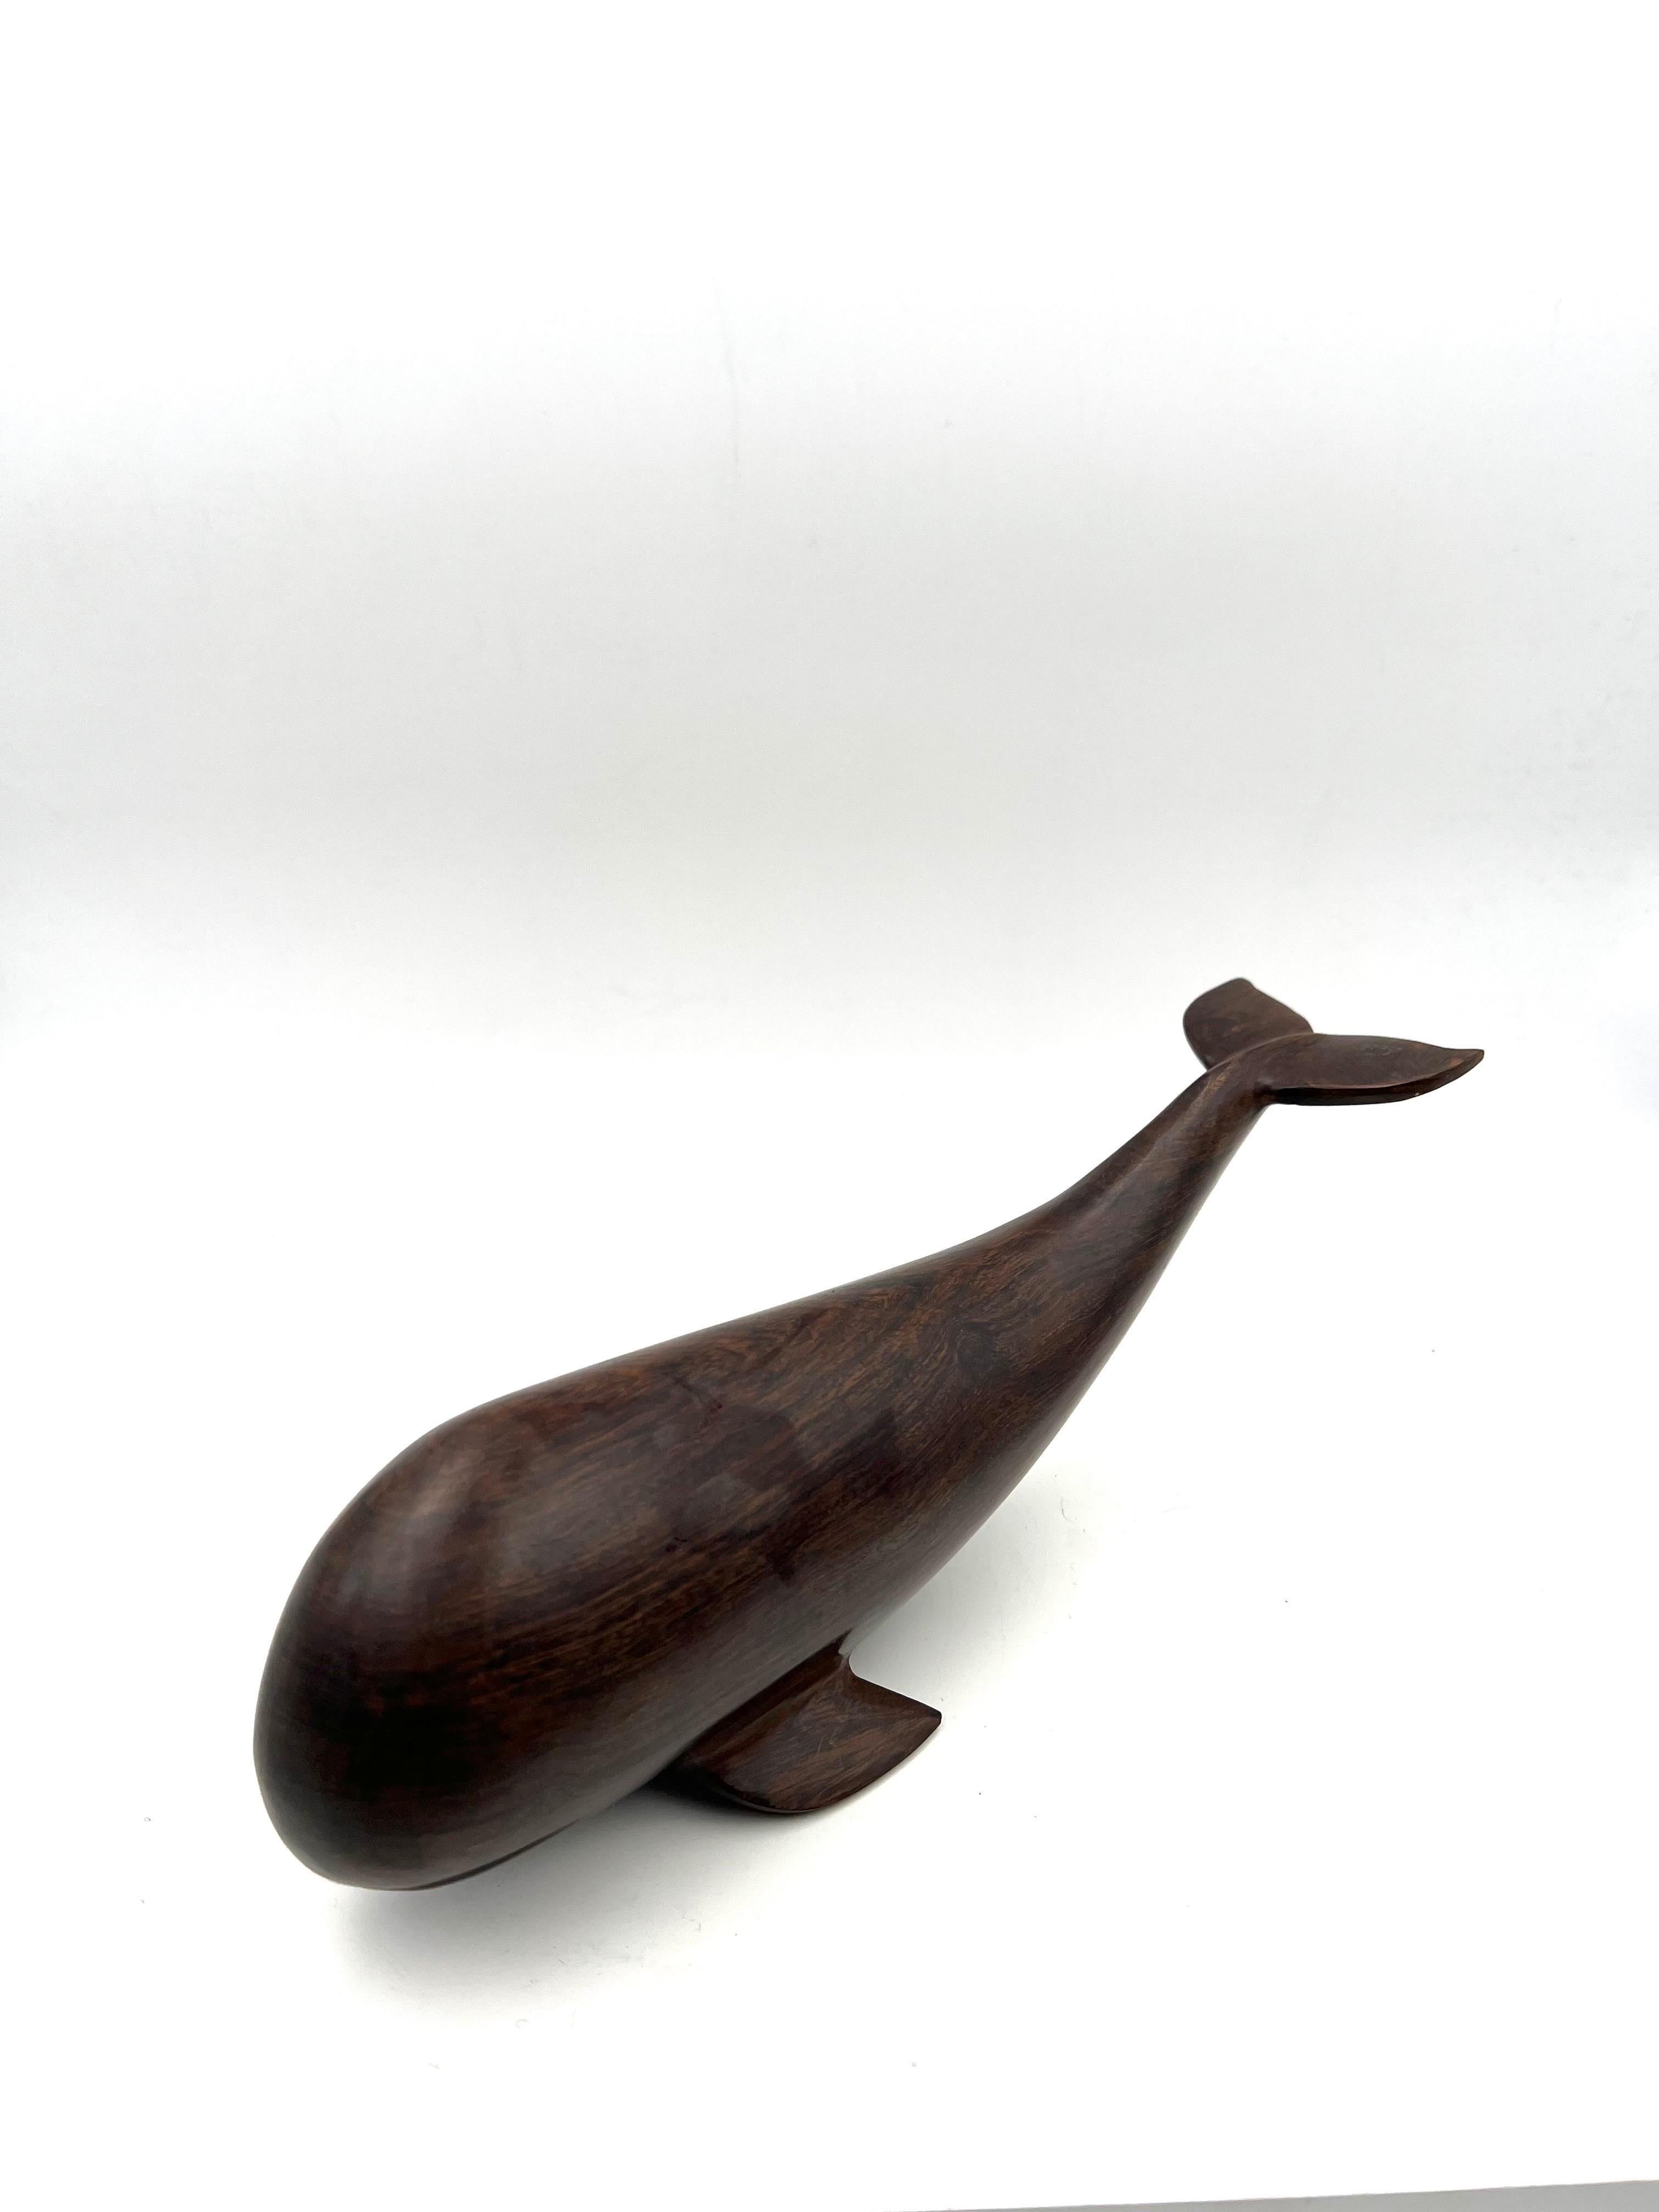 A very cool hand carved rosewood sperm whale, circa the 1980s. The piece is in great condition.